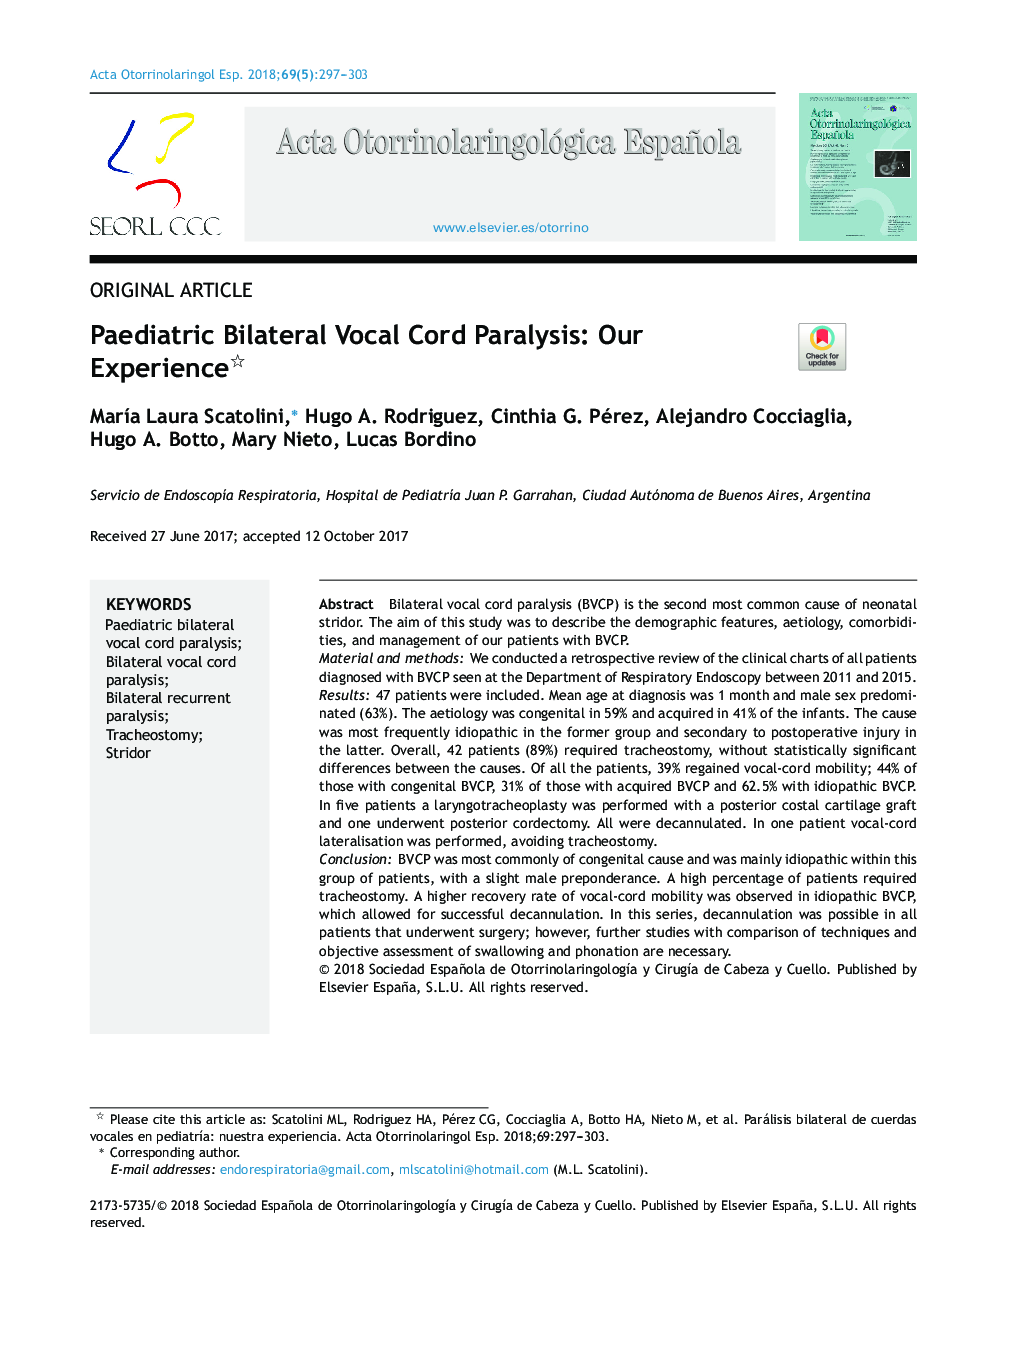 Paediatric Bilateral Vocal Cord Paralysis: Our Experience